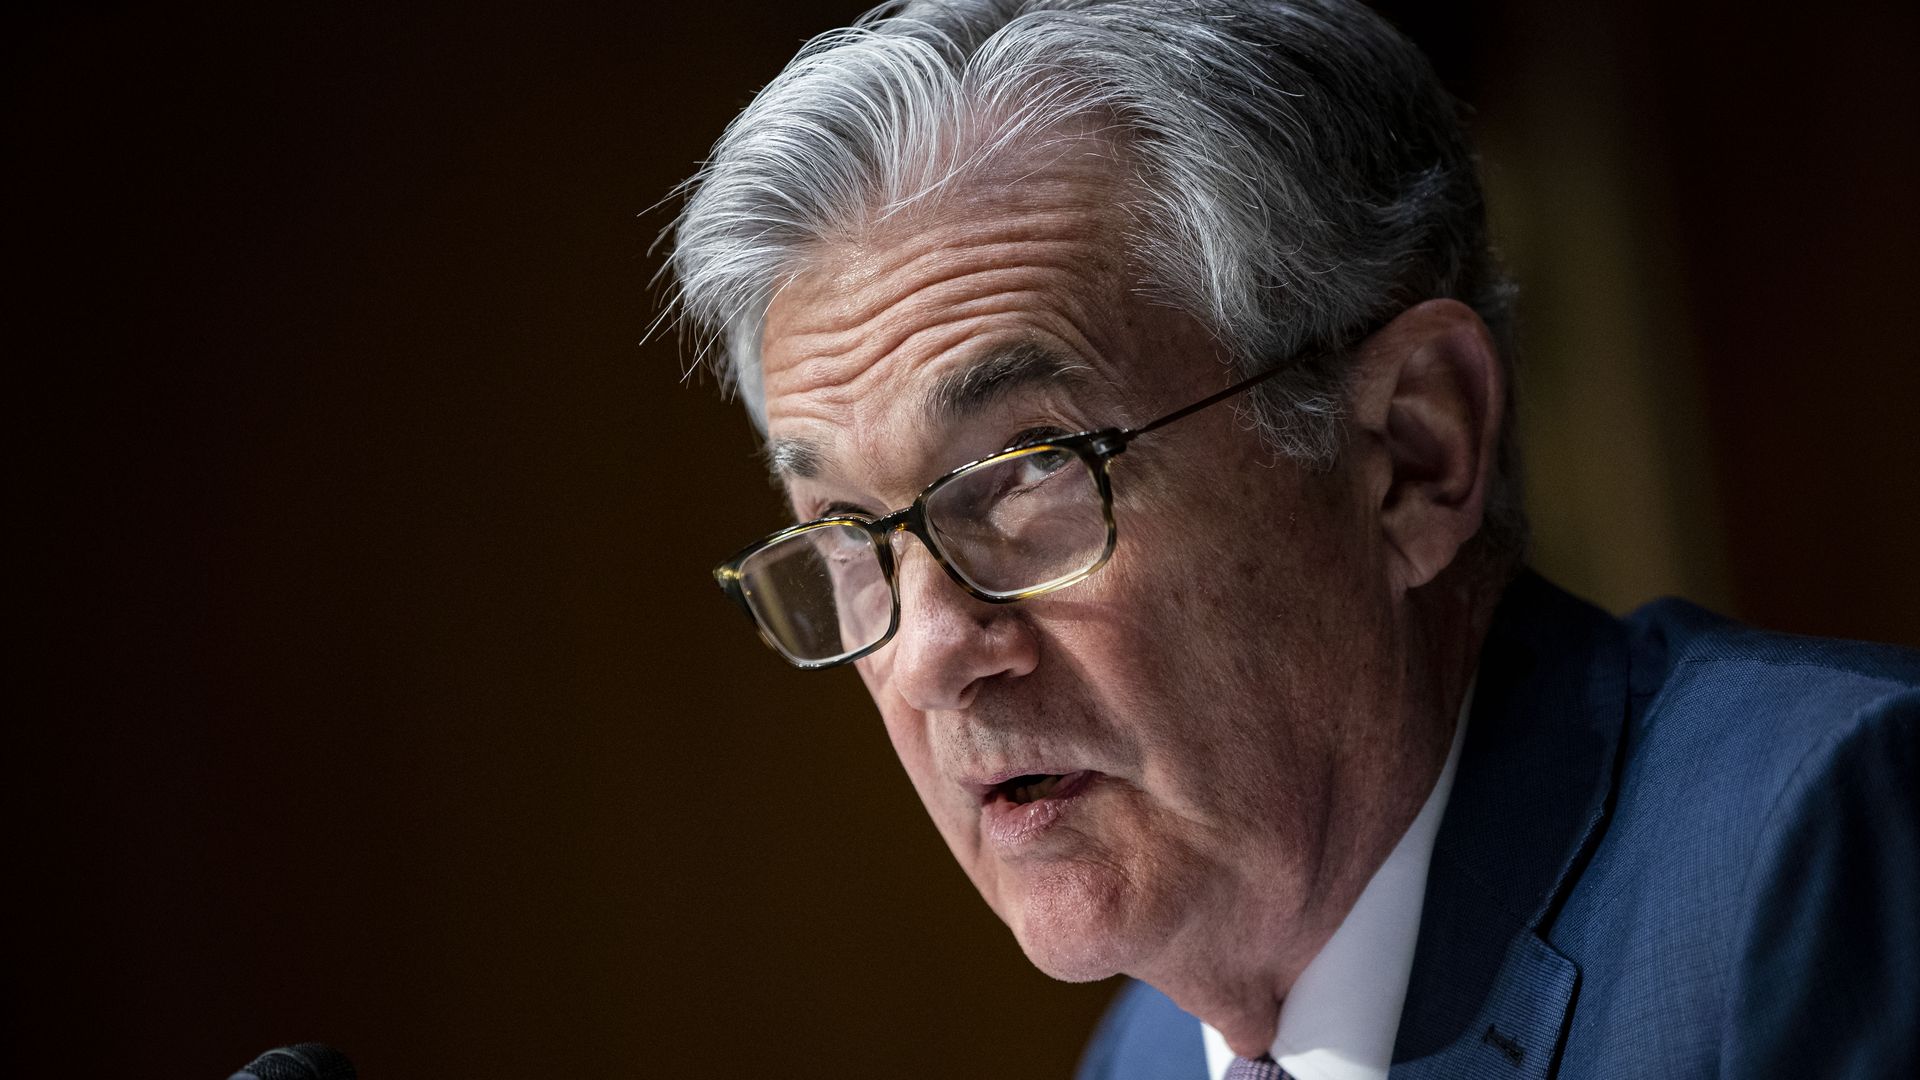 Portrait photo of Federal Reserve chair Jerome Powell